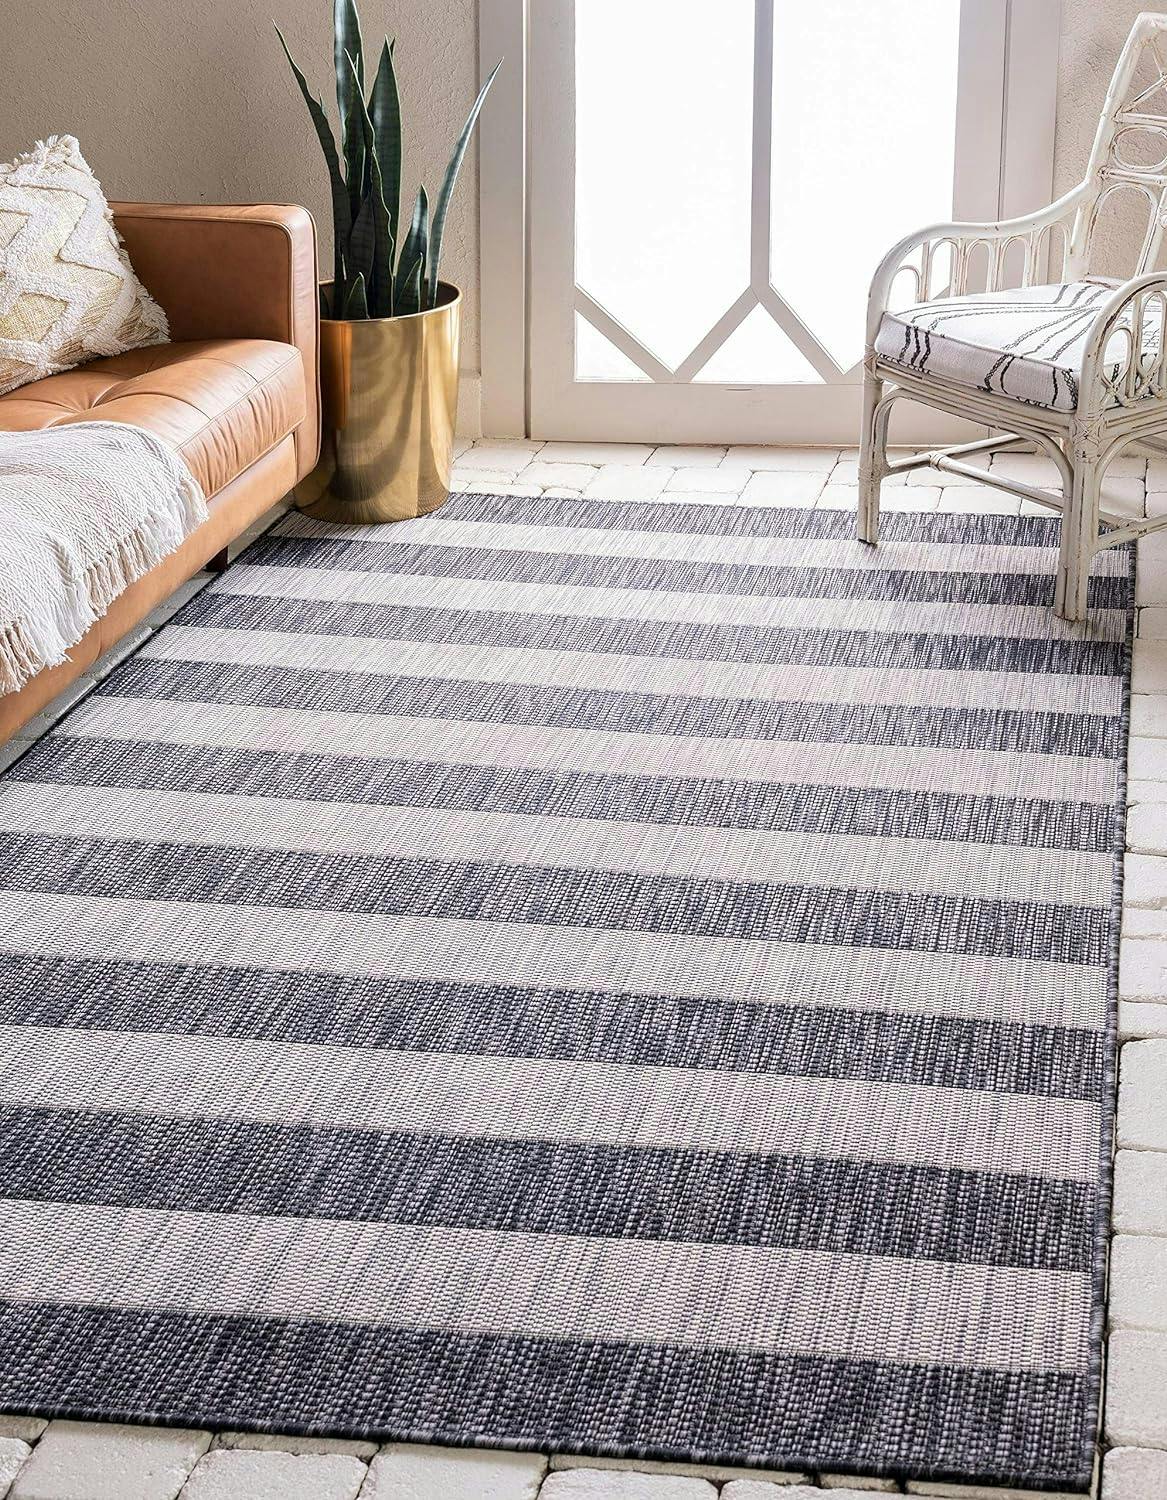 Charcoal Gray and Black Striped Synthetic Outdoor Rug 7' x 10'